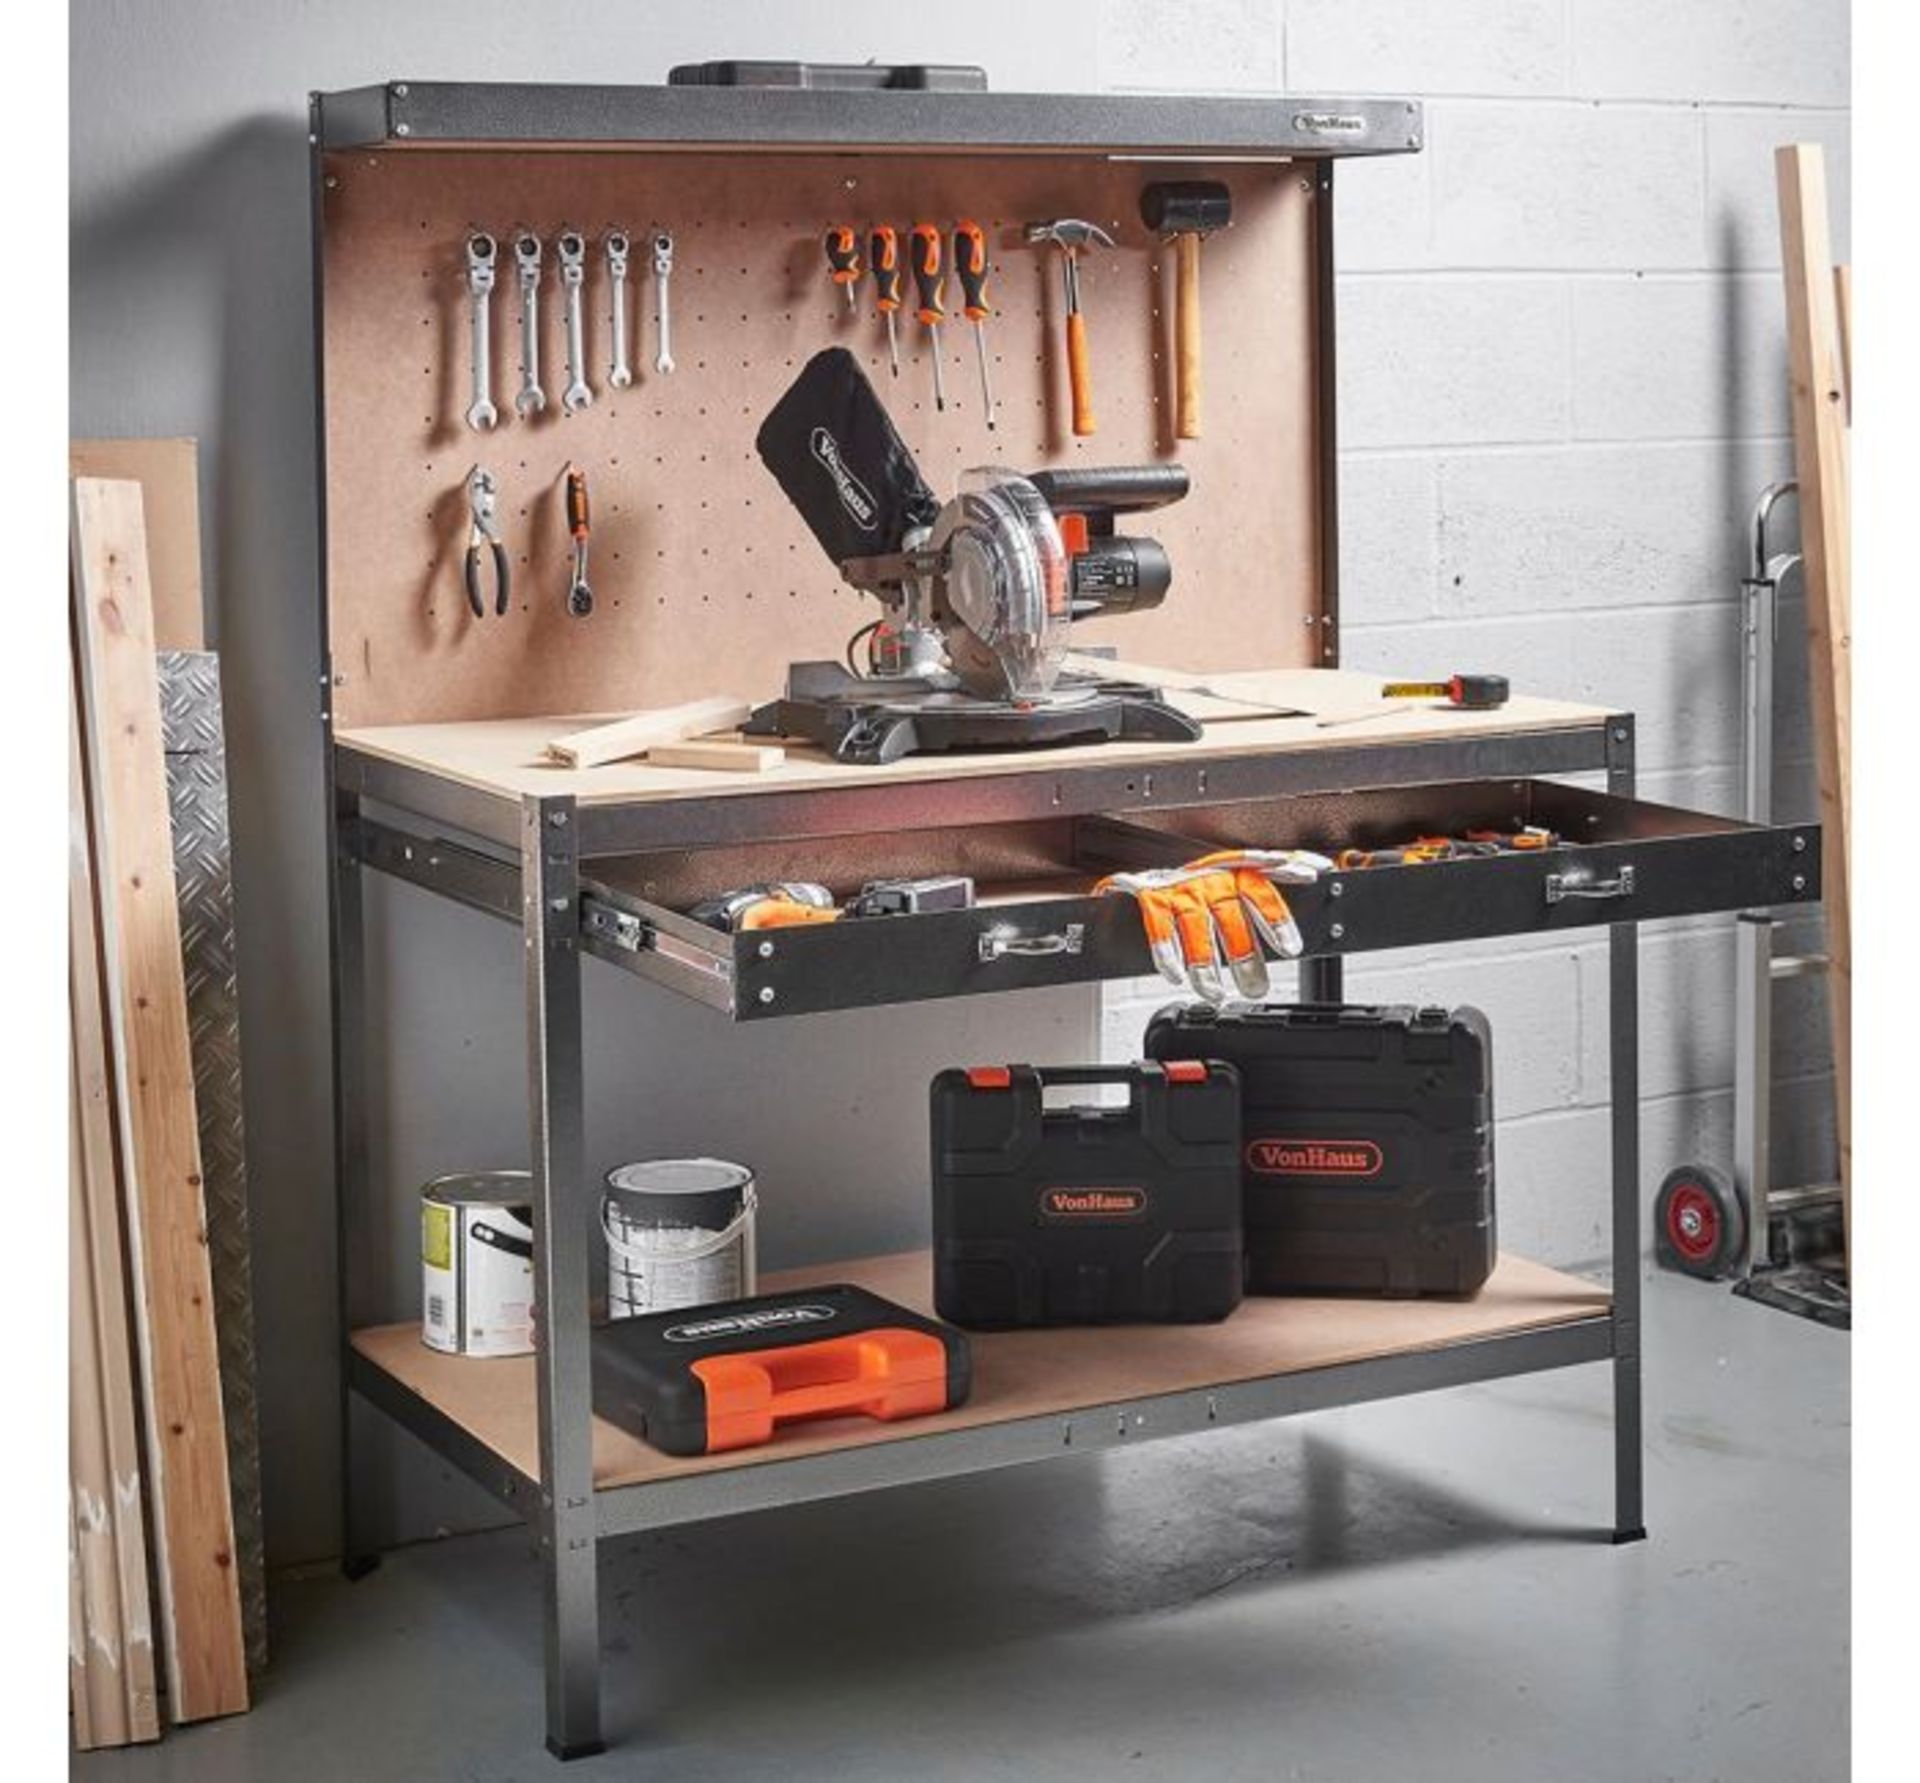 (JL144) Workbench with Pegboard Ideal for sheds and garages Powder coating finish which makes... - Image 2 of 3